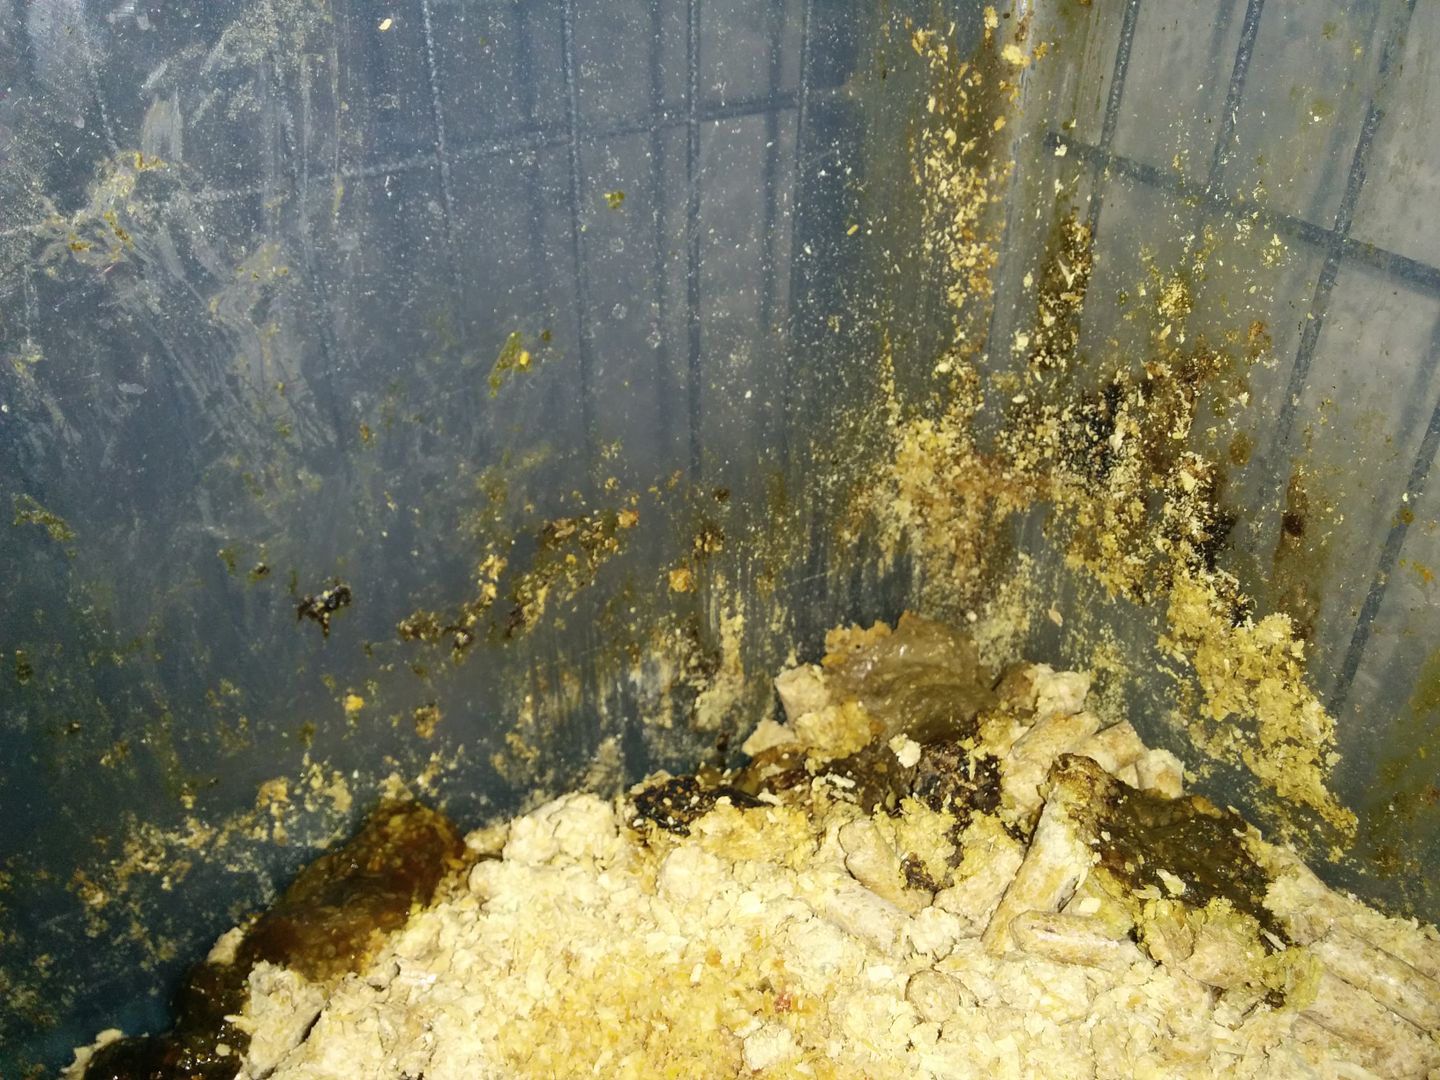 Their litter box as of this morning